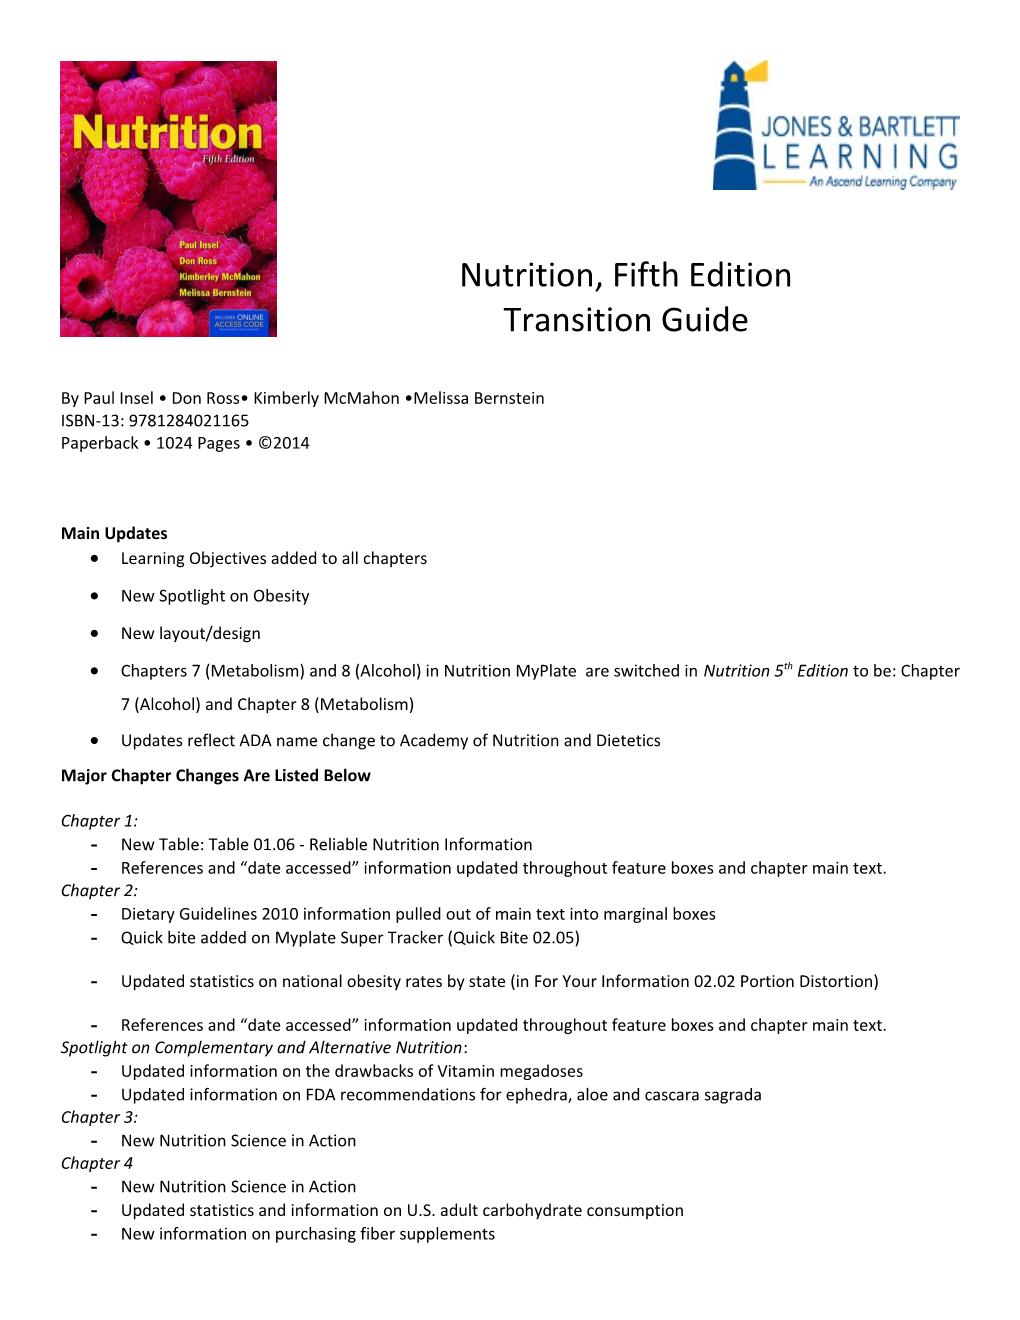 Nutrition, Fifth Edition Transition Guide